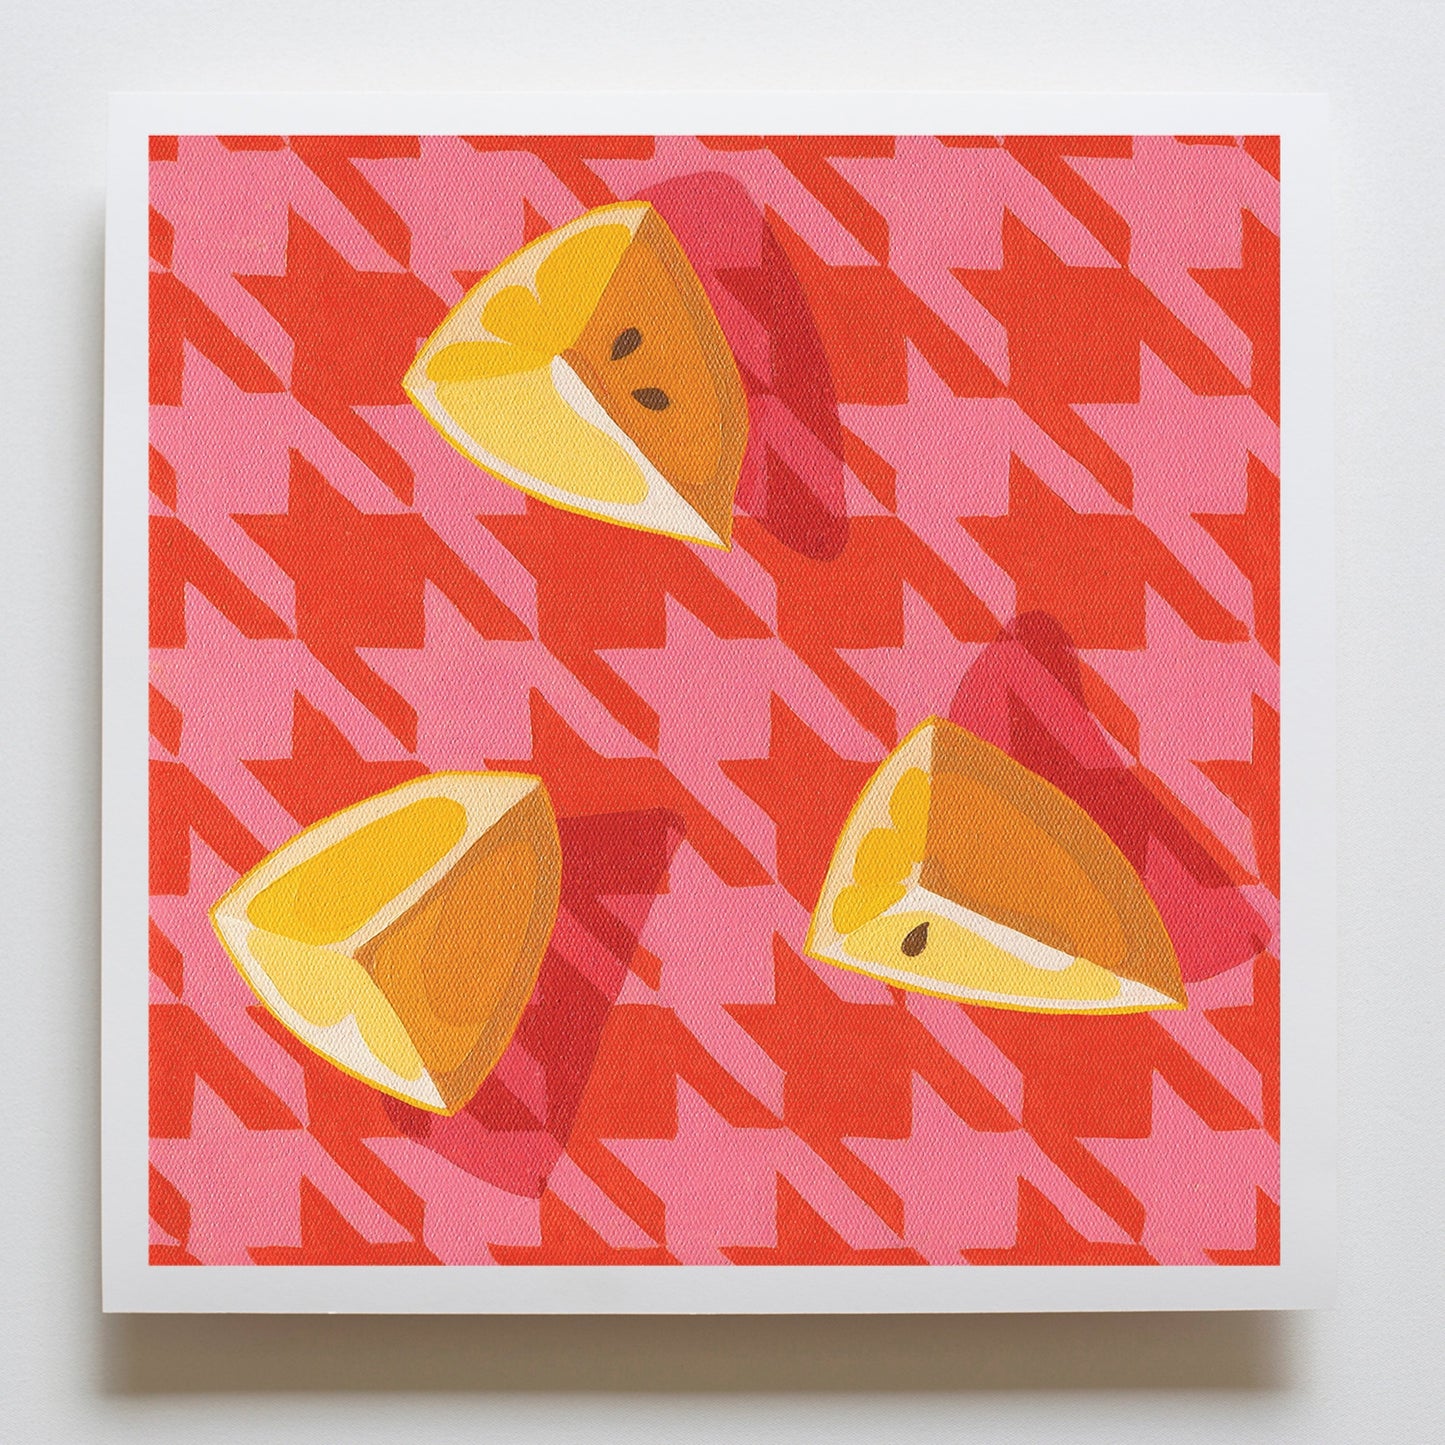 fine art paper print of an original oil painting of three wedges of lemon on a pink and red houndstooth background 